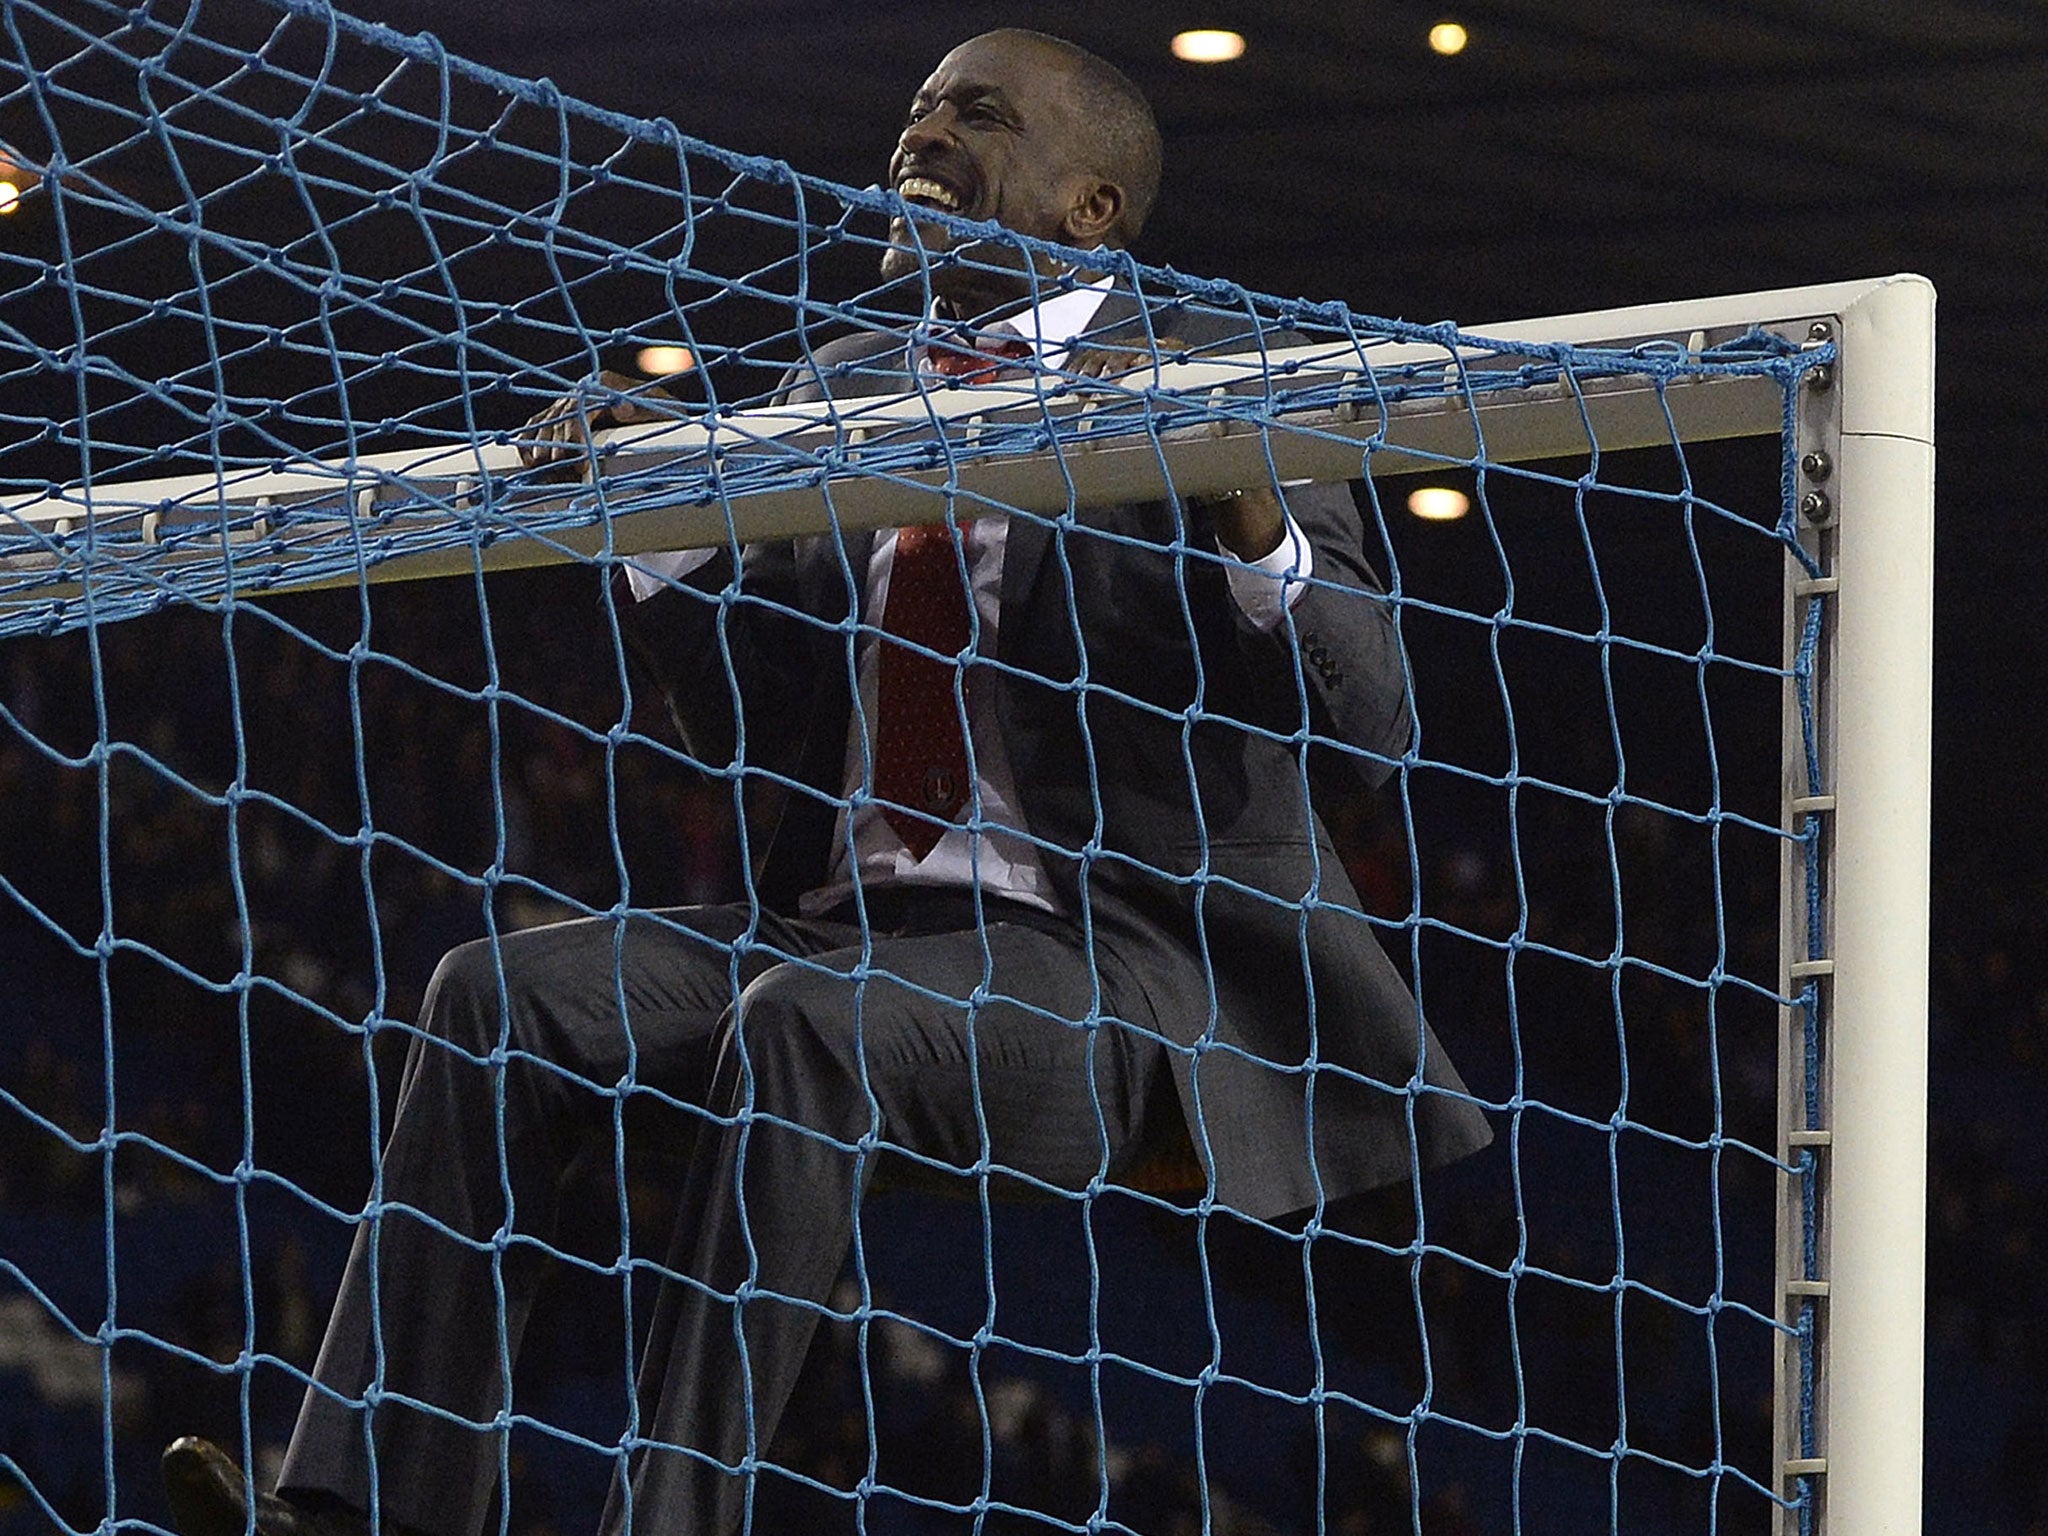 Chris Powell celebrates Charlton's 2-1 FA Cup fifth round victory over Sheffield Wednesday by swinging on the crossbar in front of the celebrating away fans